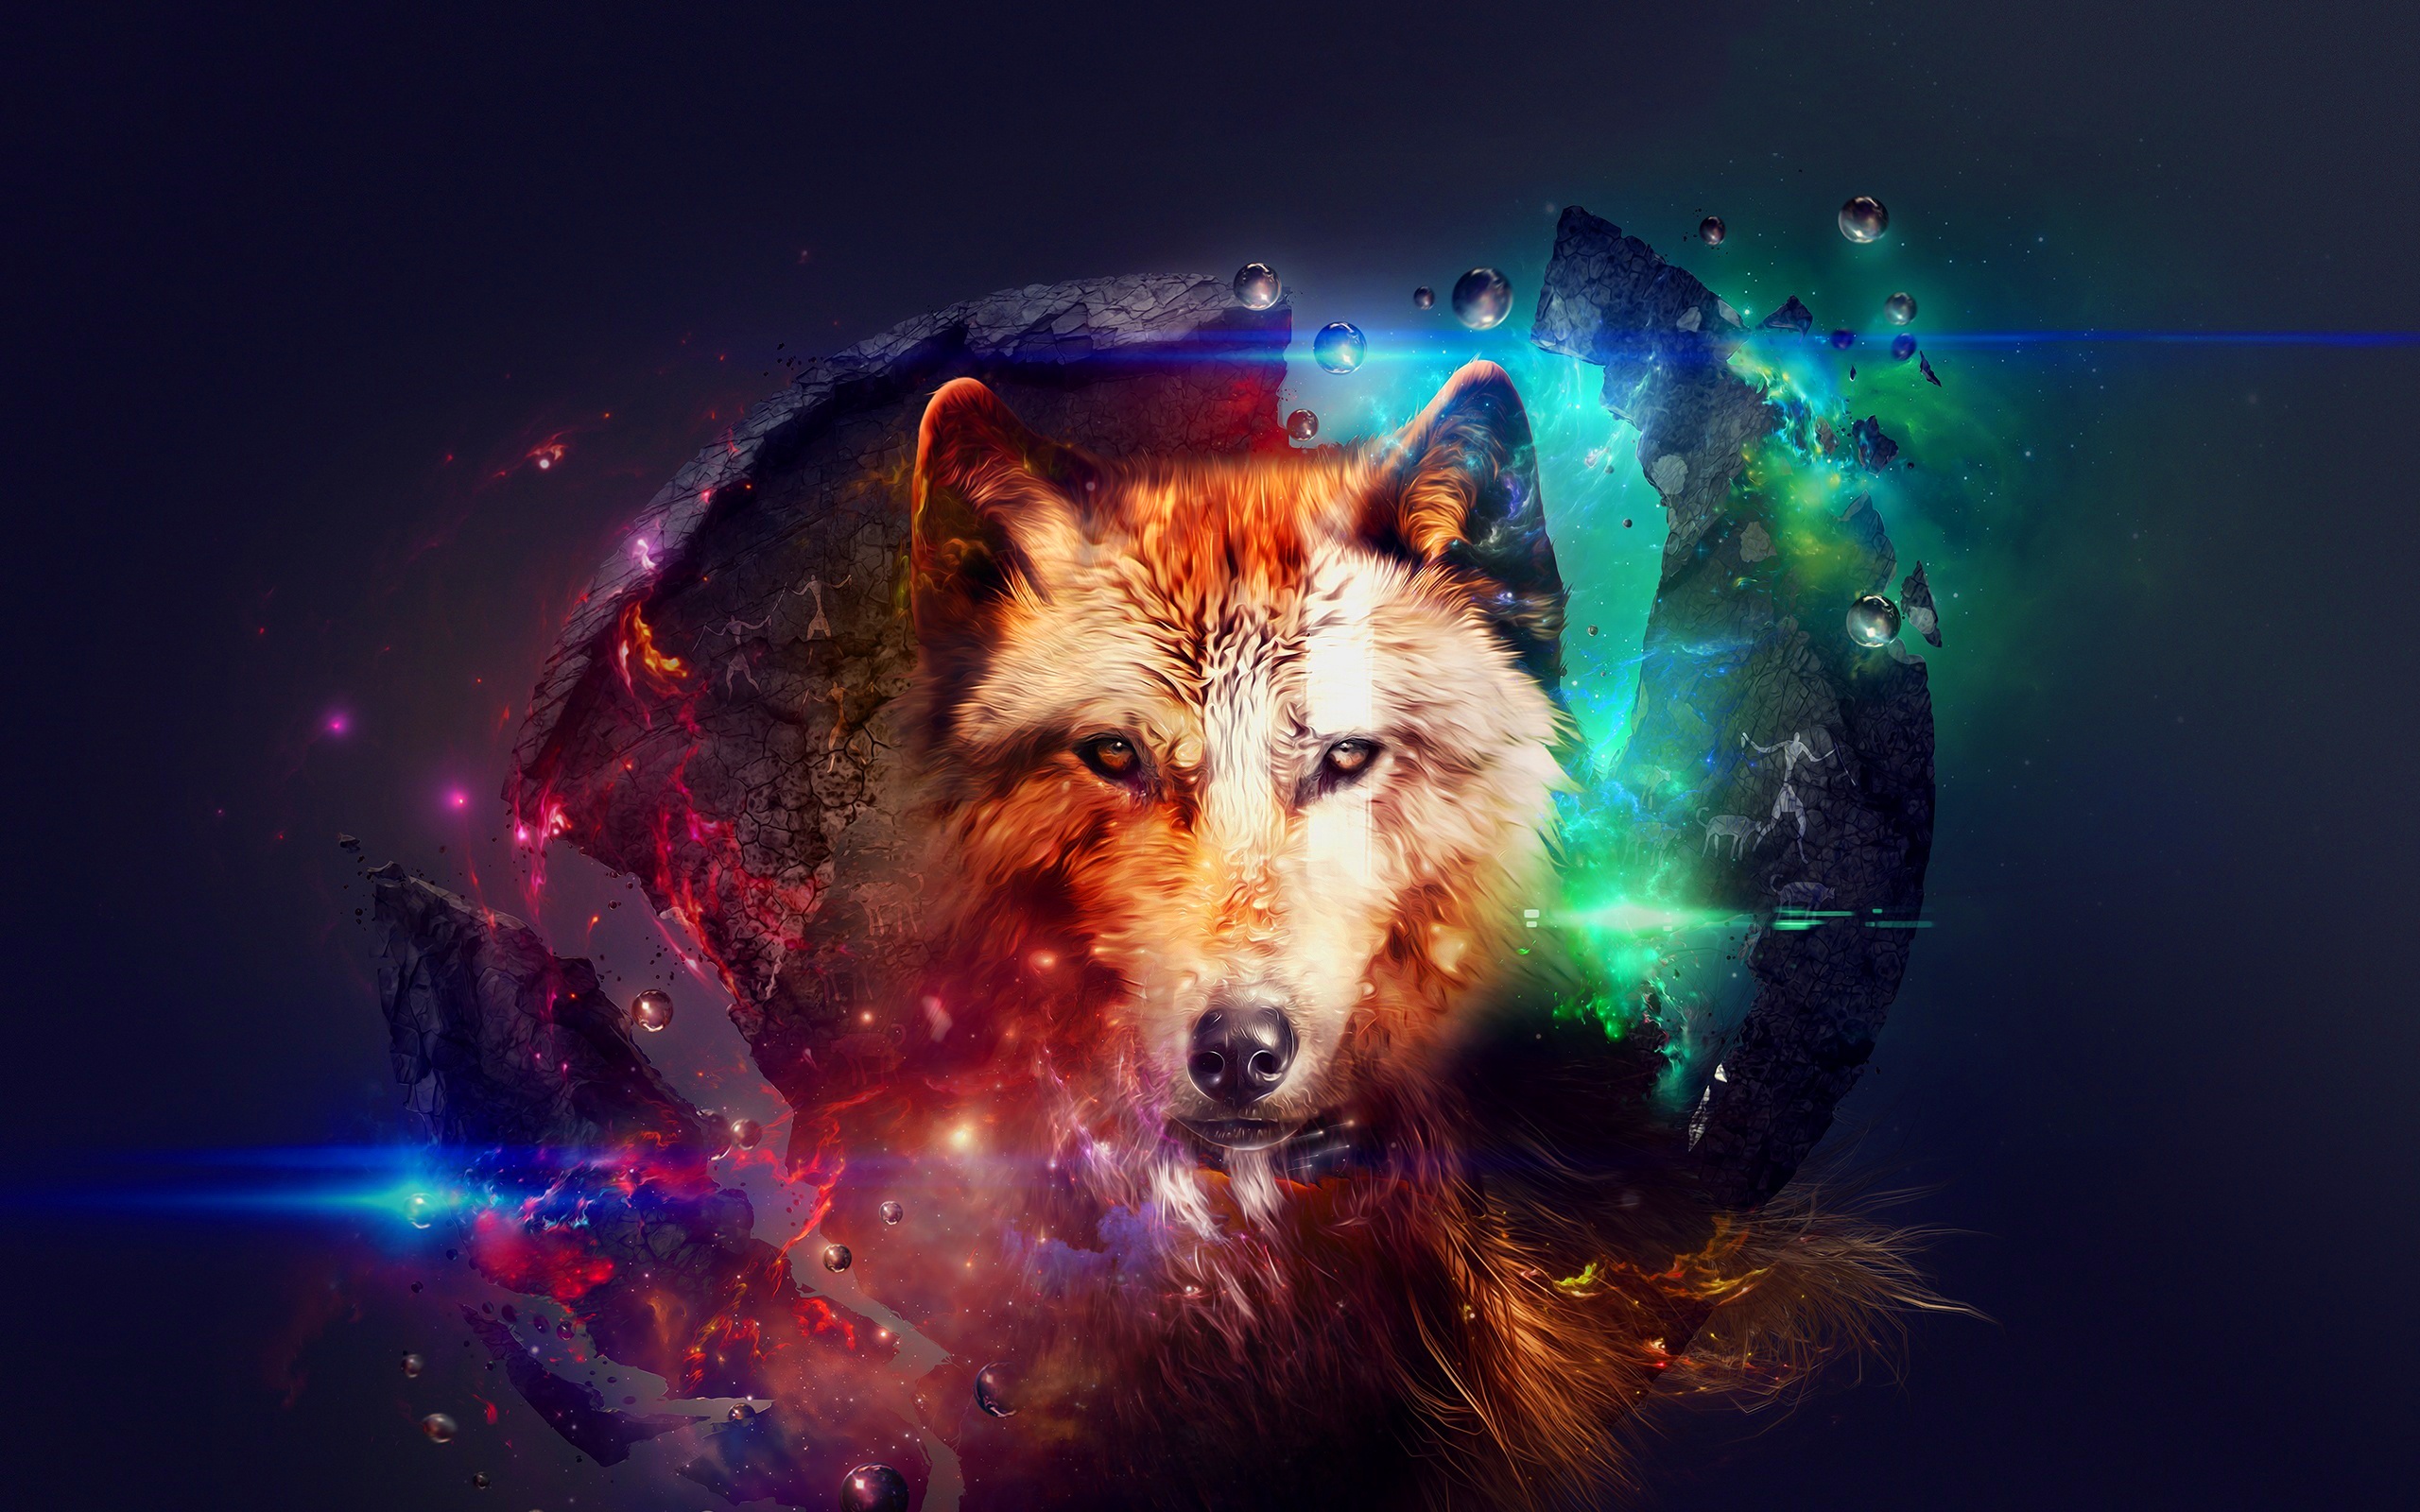 Galaxy Wolf Art Photos Image Pics Pictures Wallpaper